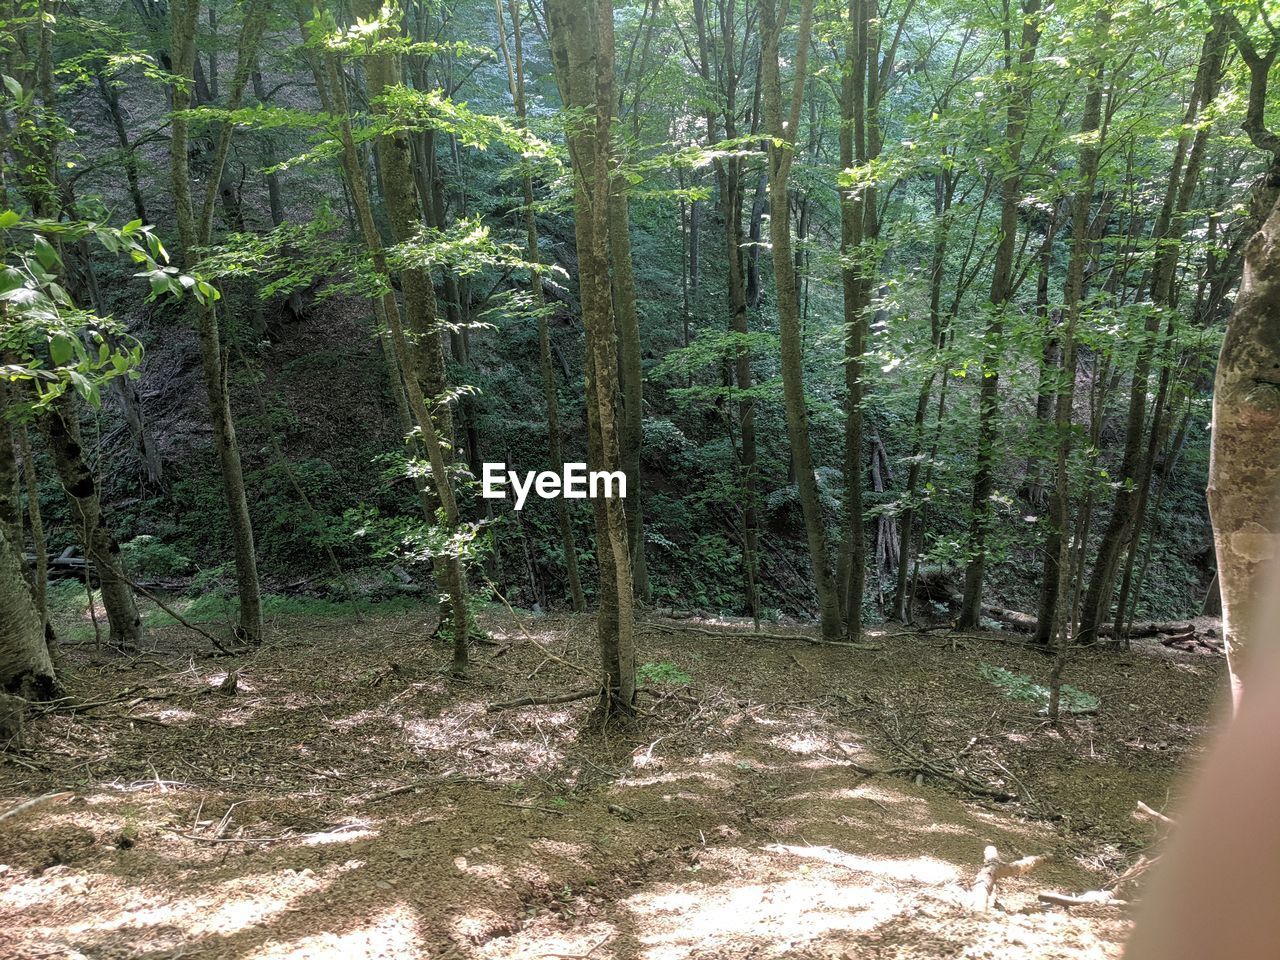 TREES AND PLANTS IN FOREST